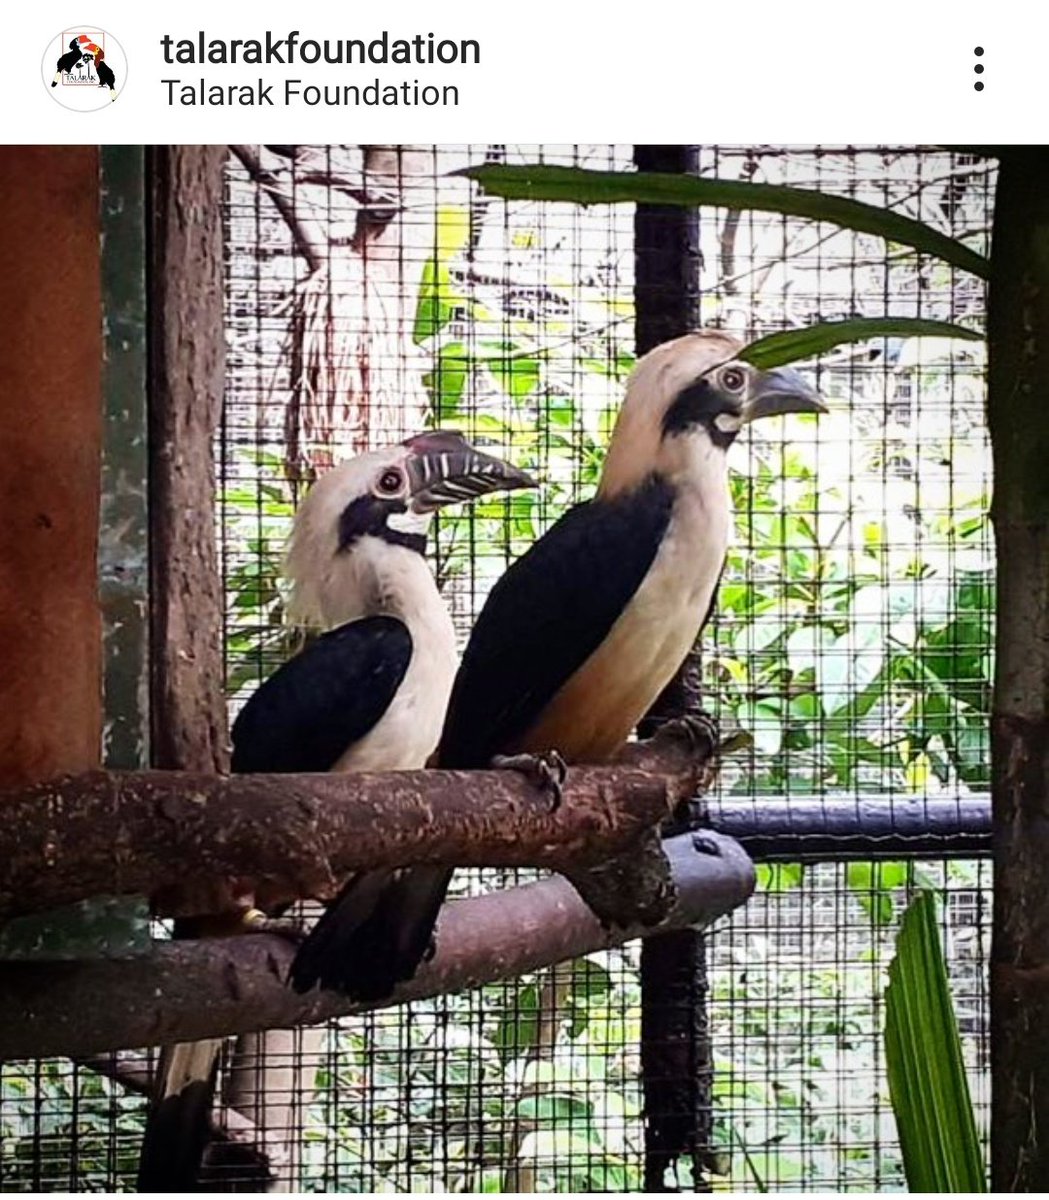 My fave bird is the endangered Visayan tarictic hornbill  In the wild, this species can now only be found in Negros and Panay islands. Follow Talarak Foundation on IG for news on their captive breeding program for these.  #IBD2020  #BiodiversityDay